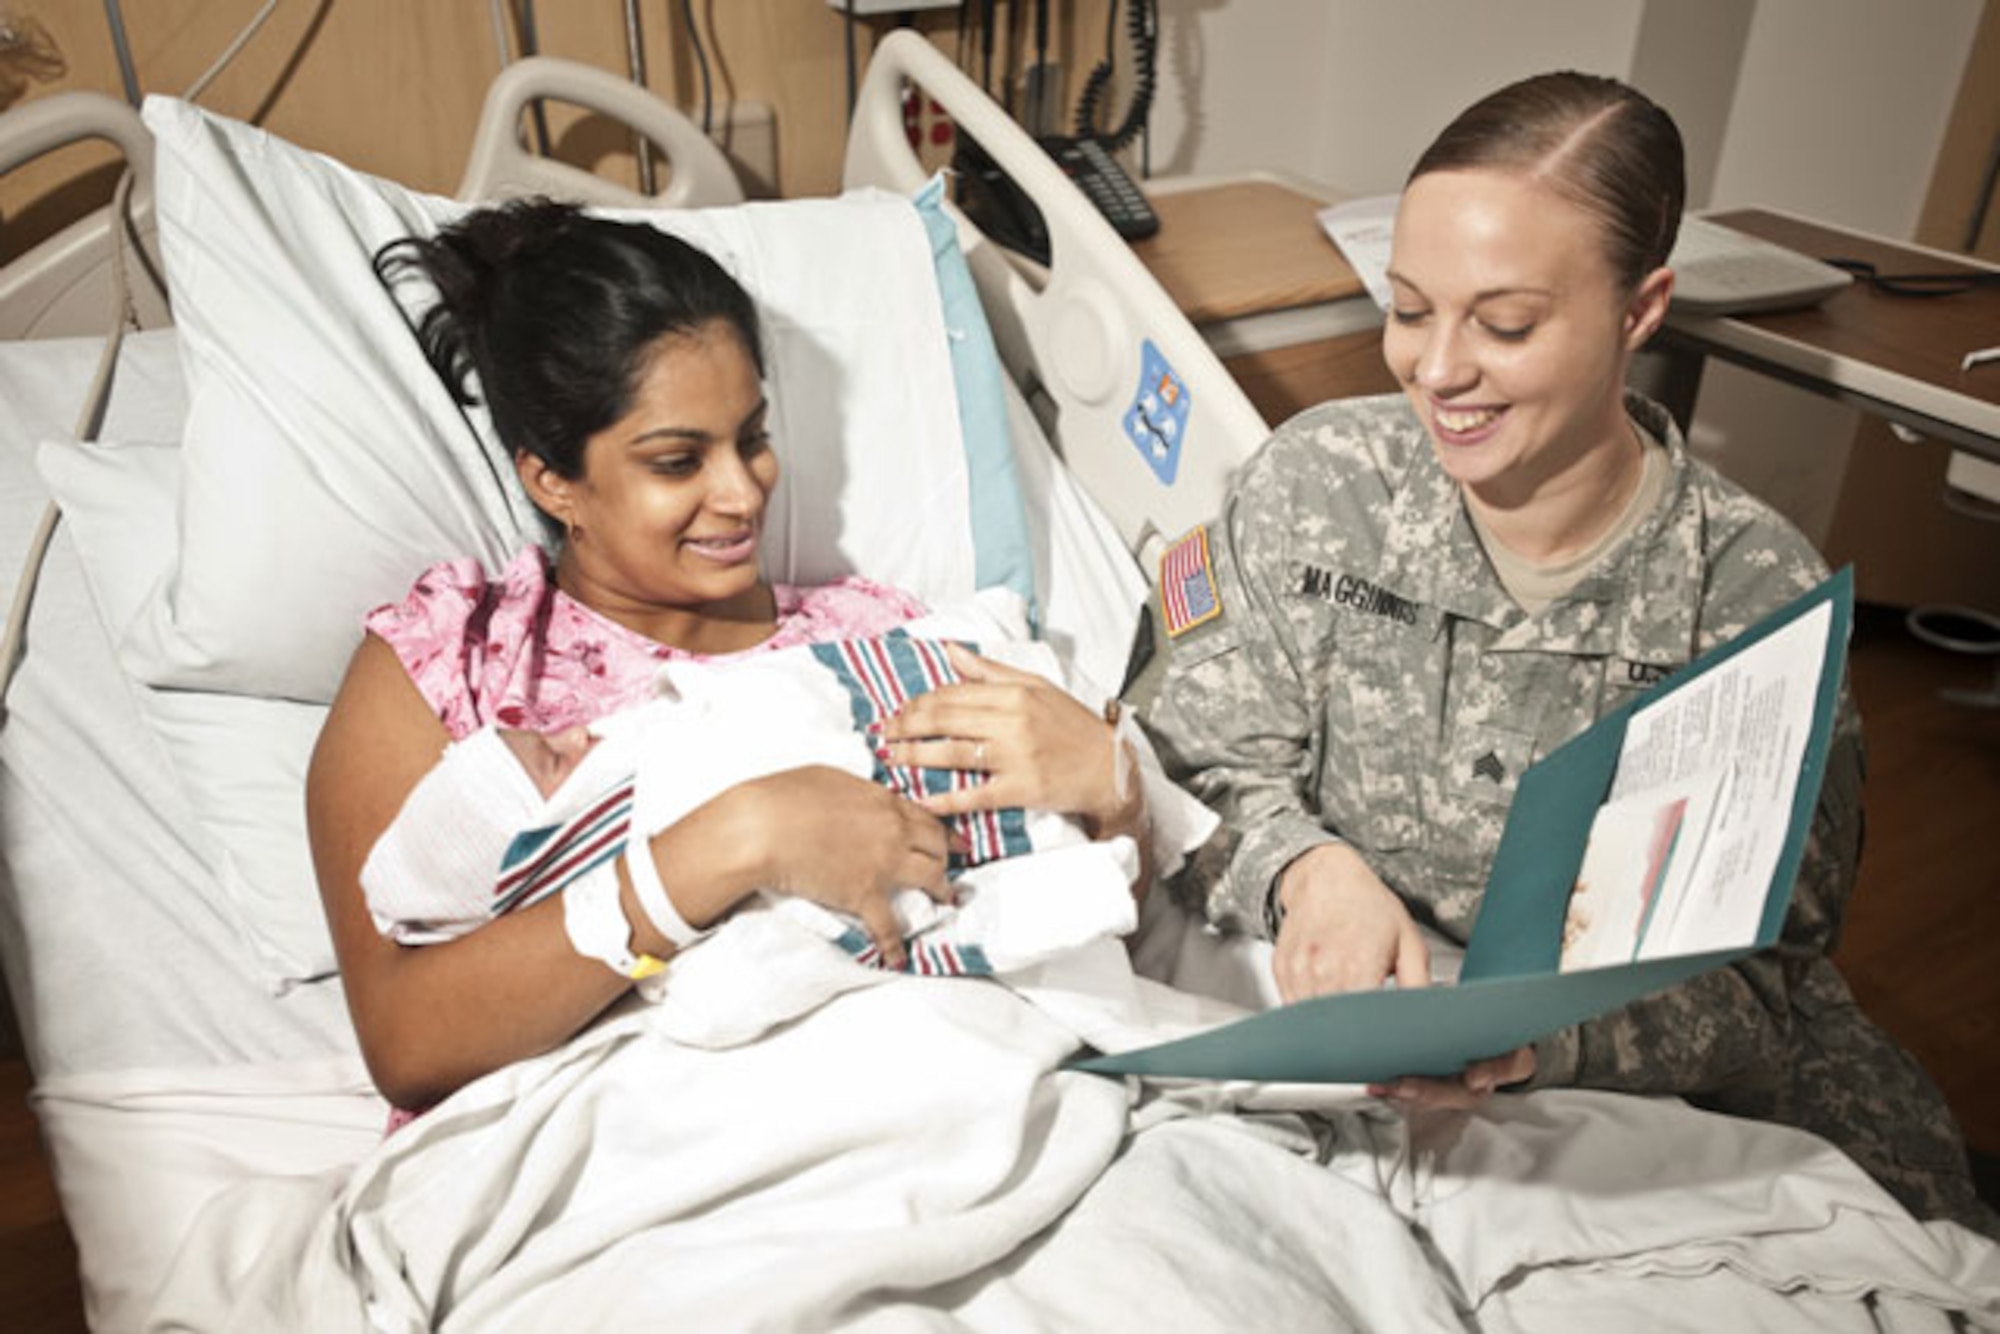 Sgt. Desiree Magginnis helps new mother, Amrita Thomas, learn how to best care for her newborn son, Ryan Thomas, in the Mother-Baby Unit at Fort Belvoir Community Hospital on July 27, 2012. (Army Photo by Tina Staffieri)